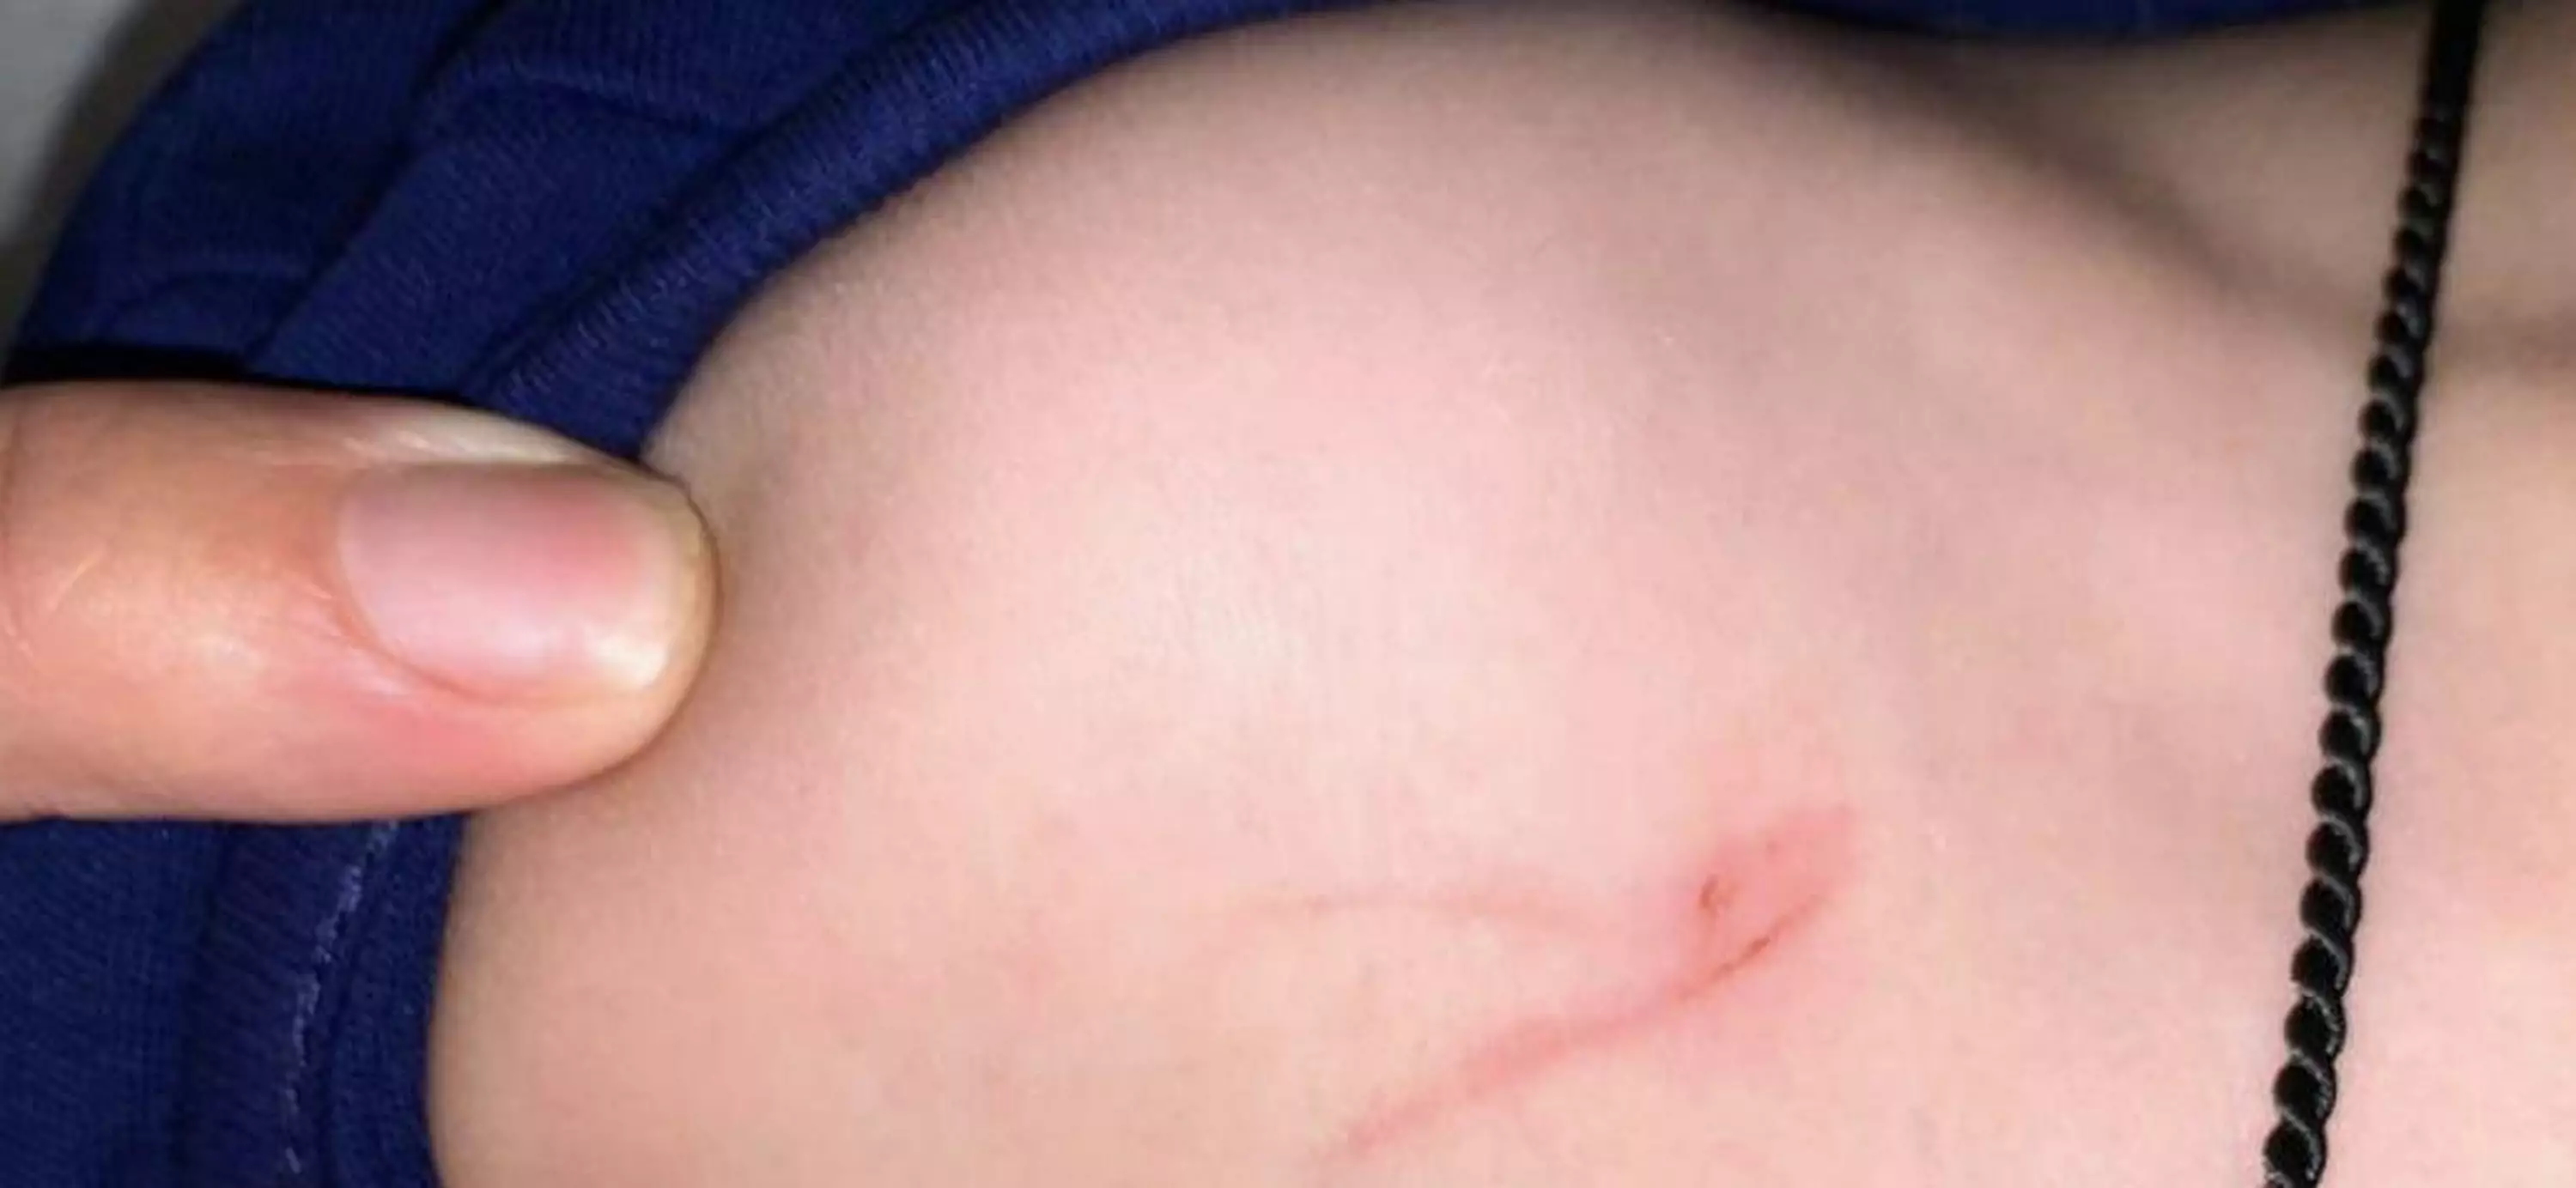 One-year-old Demid suffered scratches and bruises from the baptism.